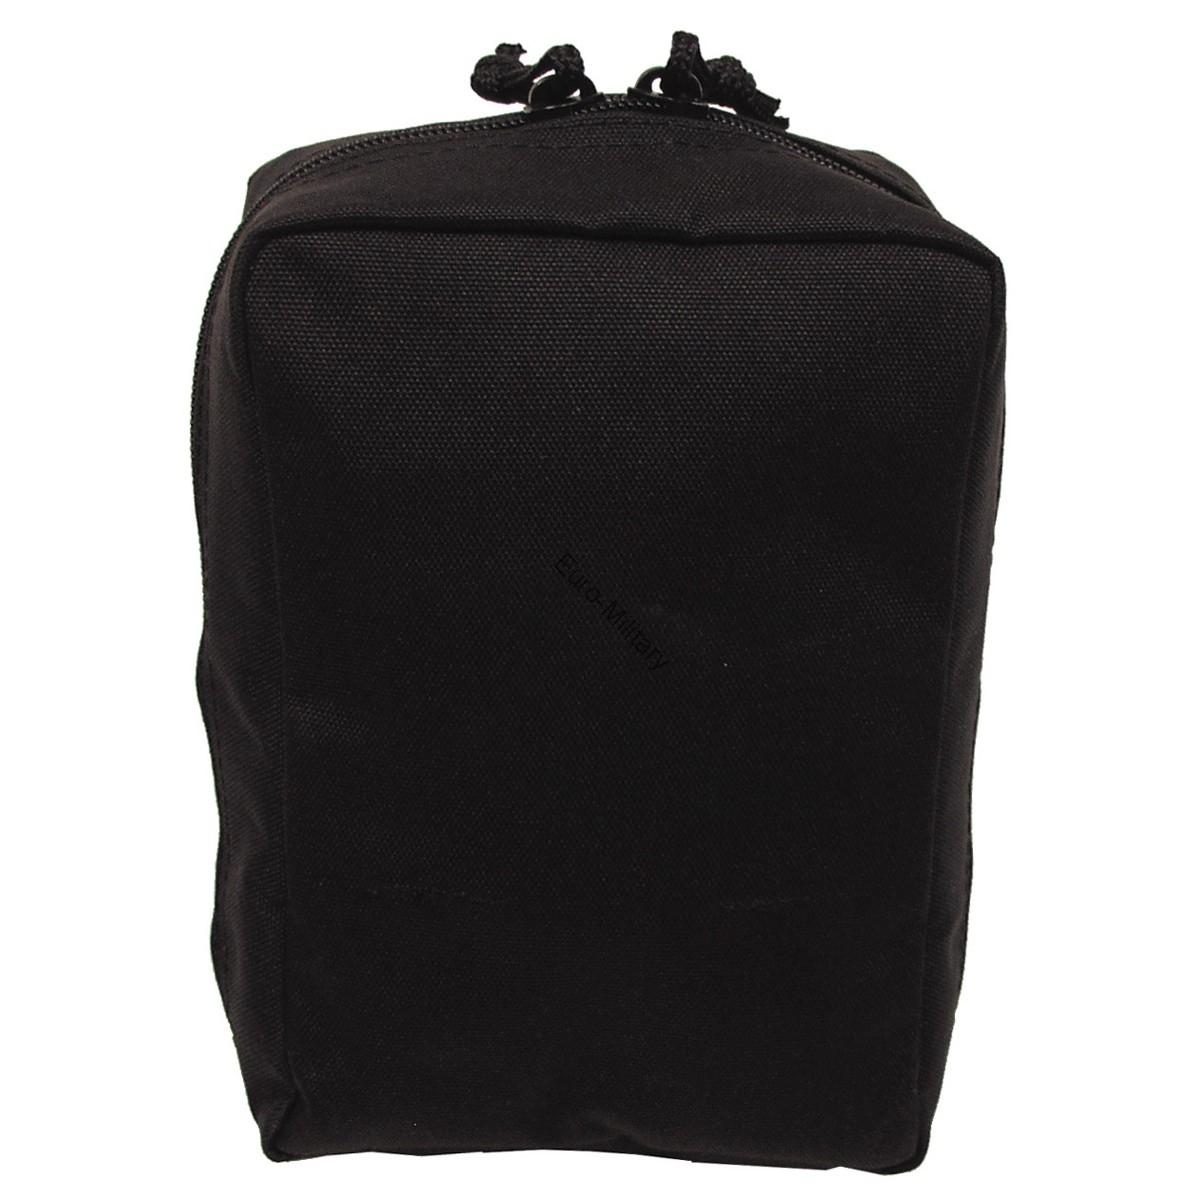 Tactical Utility Mollle Small Pouch - Black